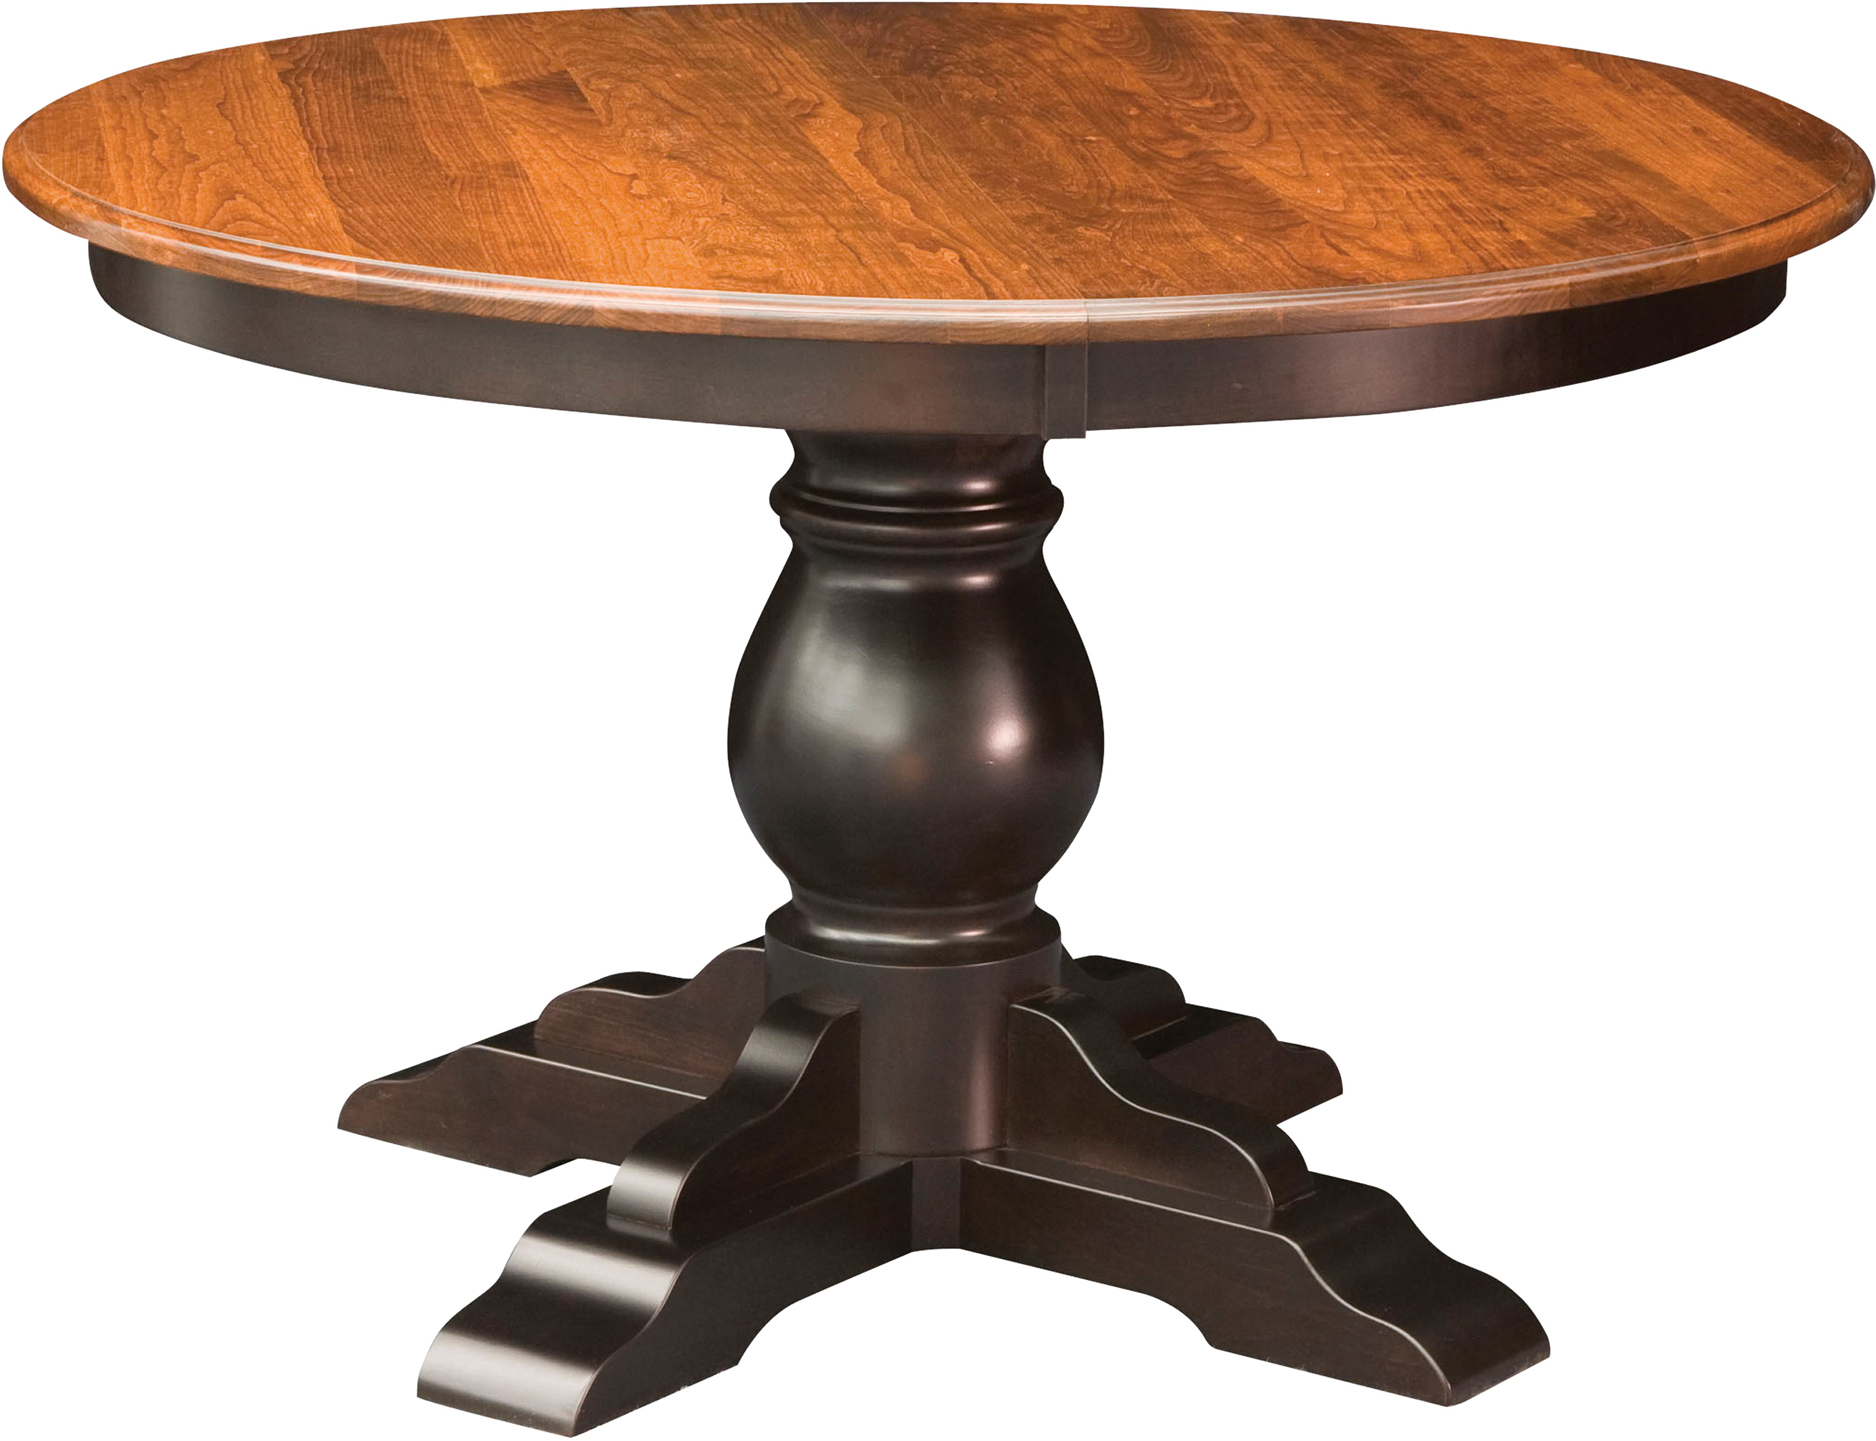 Pedistal Dining Room Table With Barrel Base